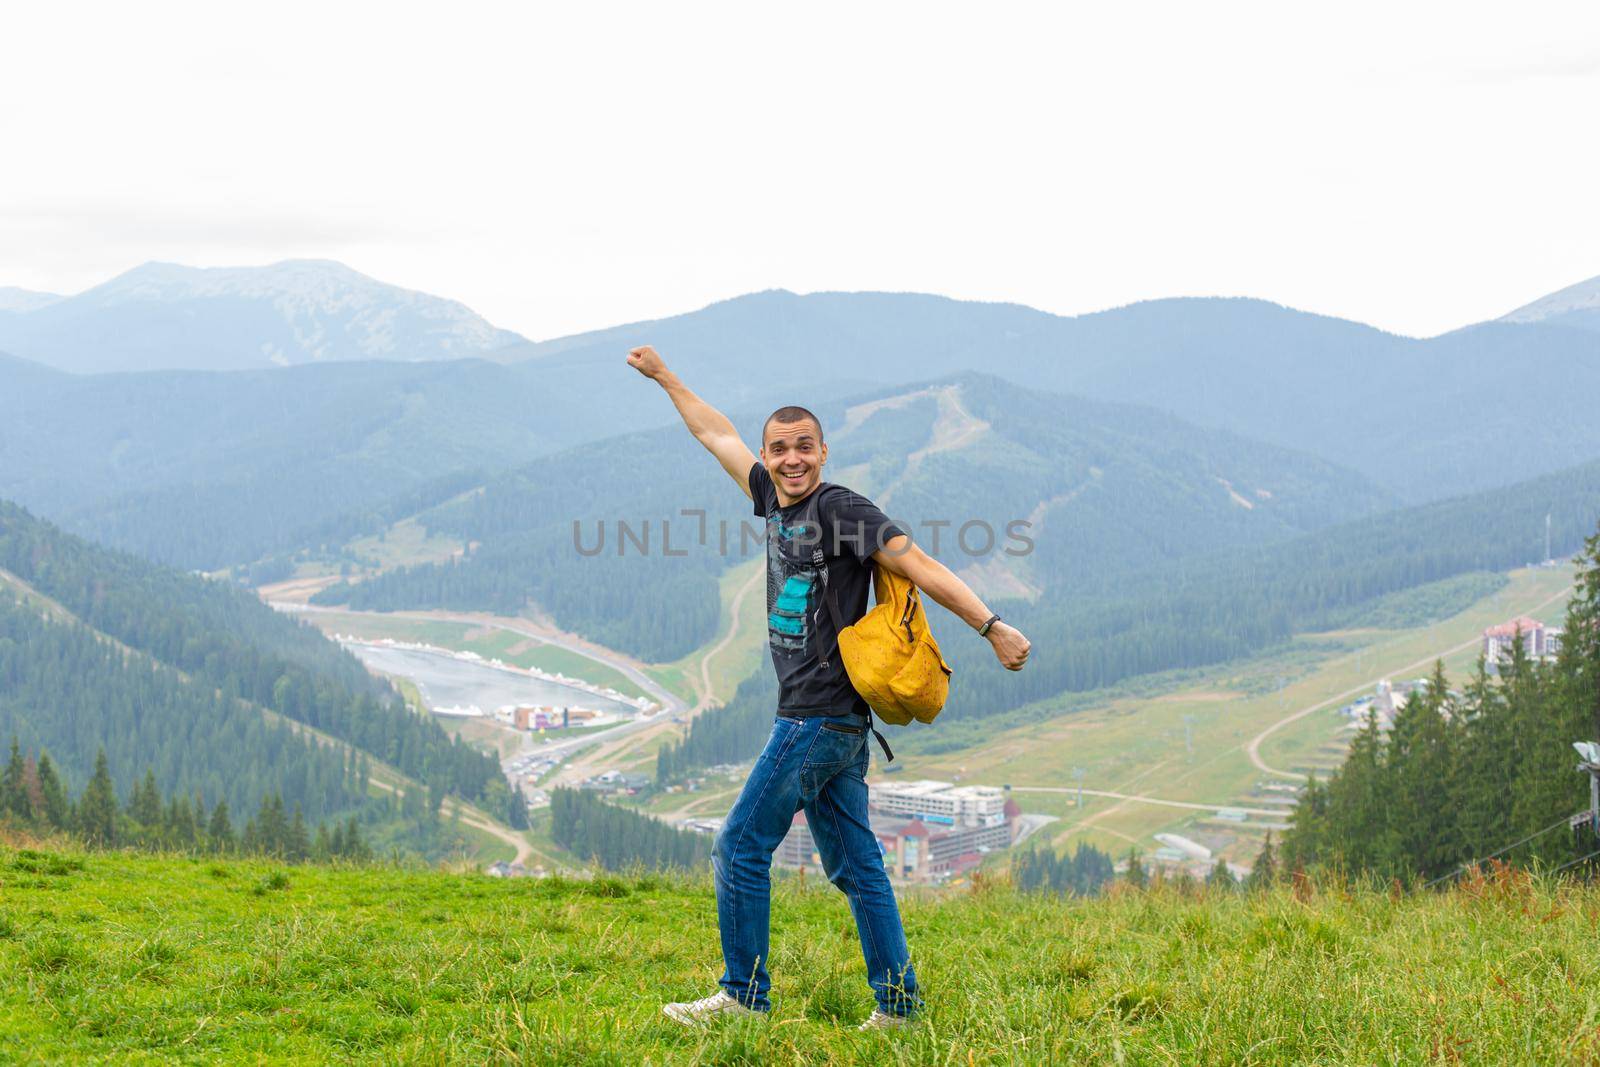 A guy travels with a yellow backpack through picturesque places with beautiful mountain landscapes.